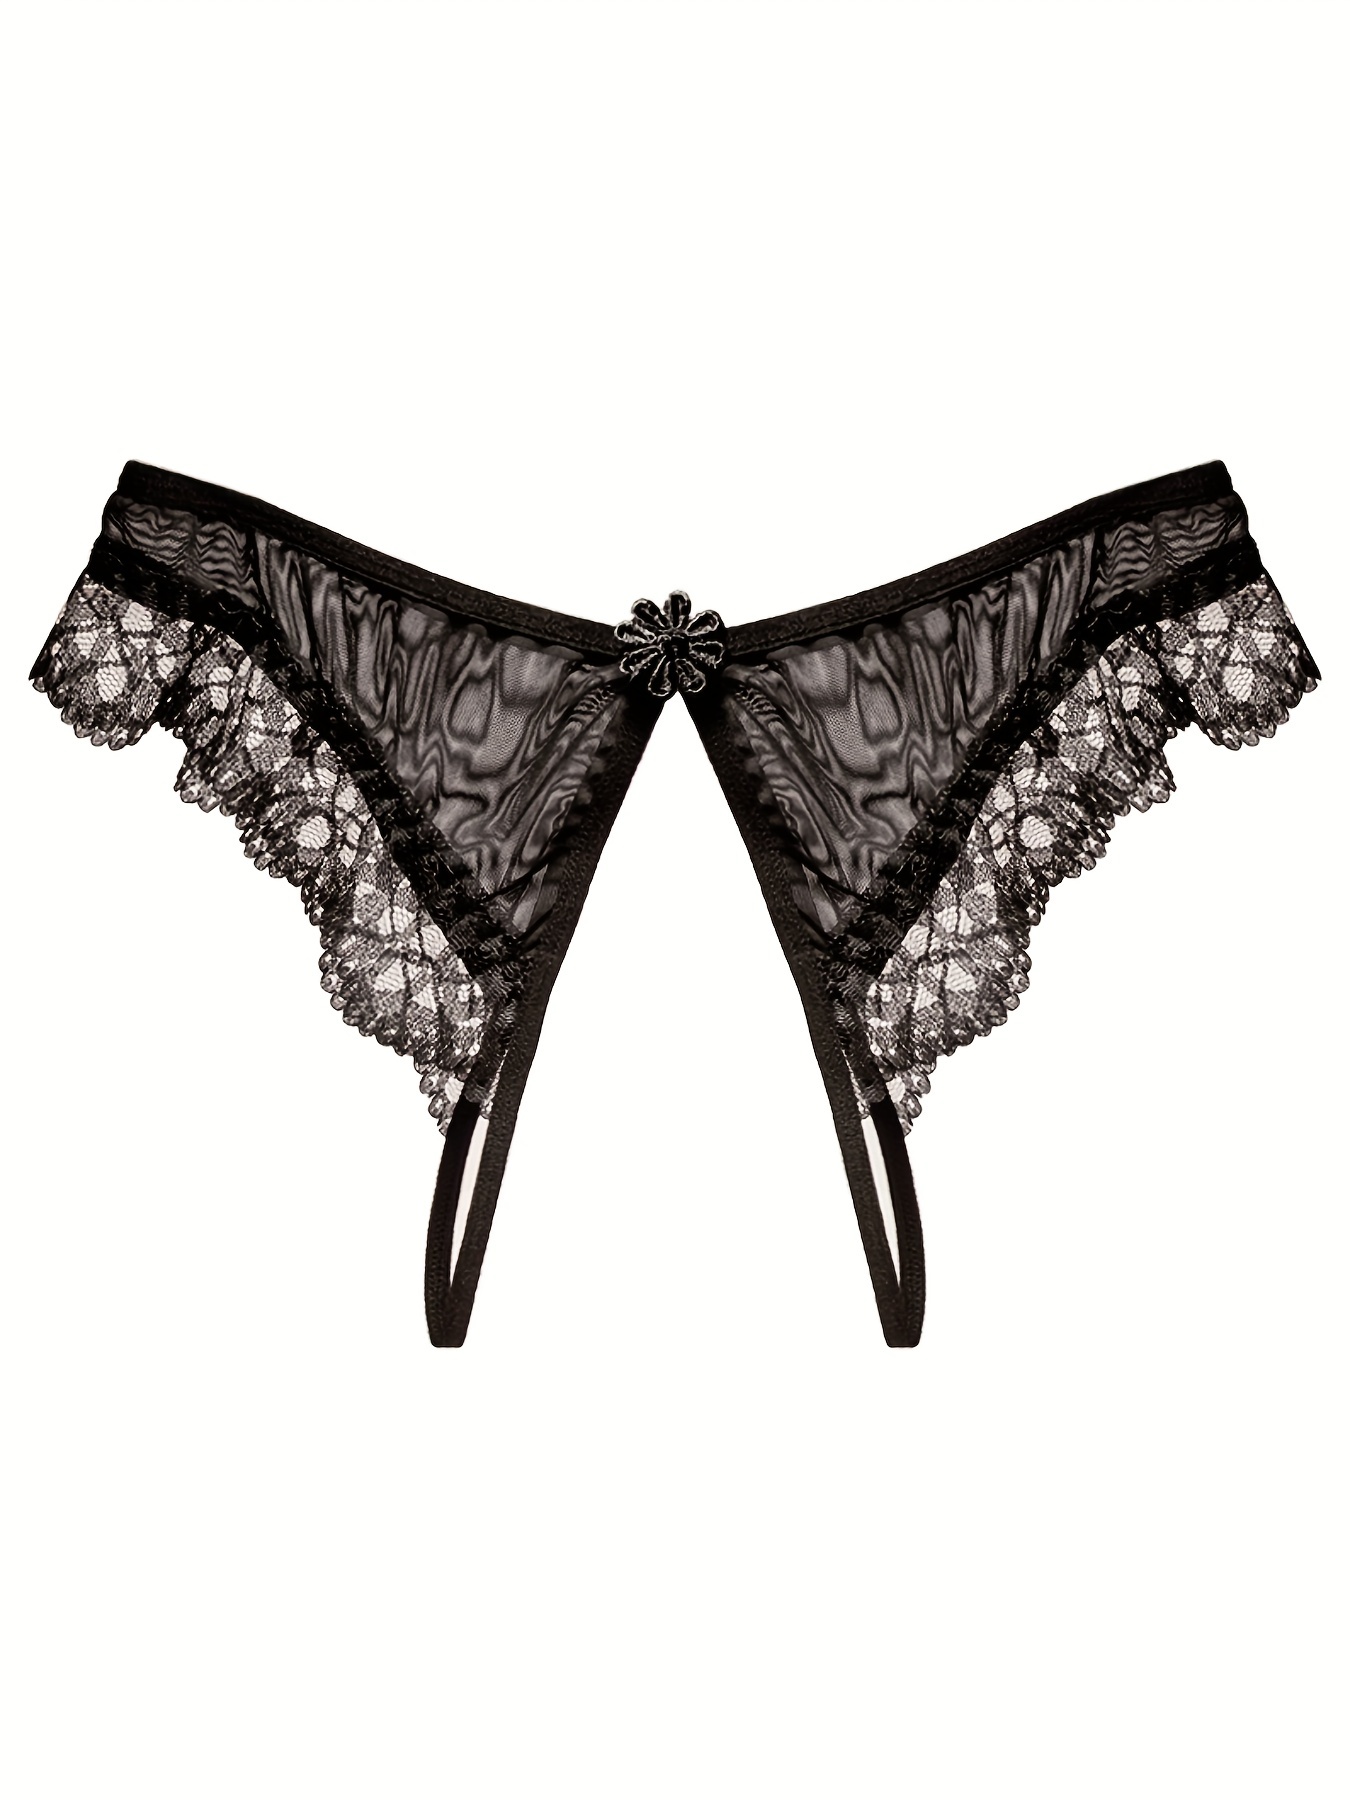 Female T-Back Crotch Mesh Lace Panties, Snazzyway